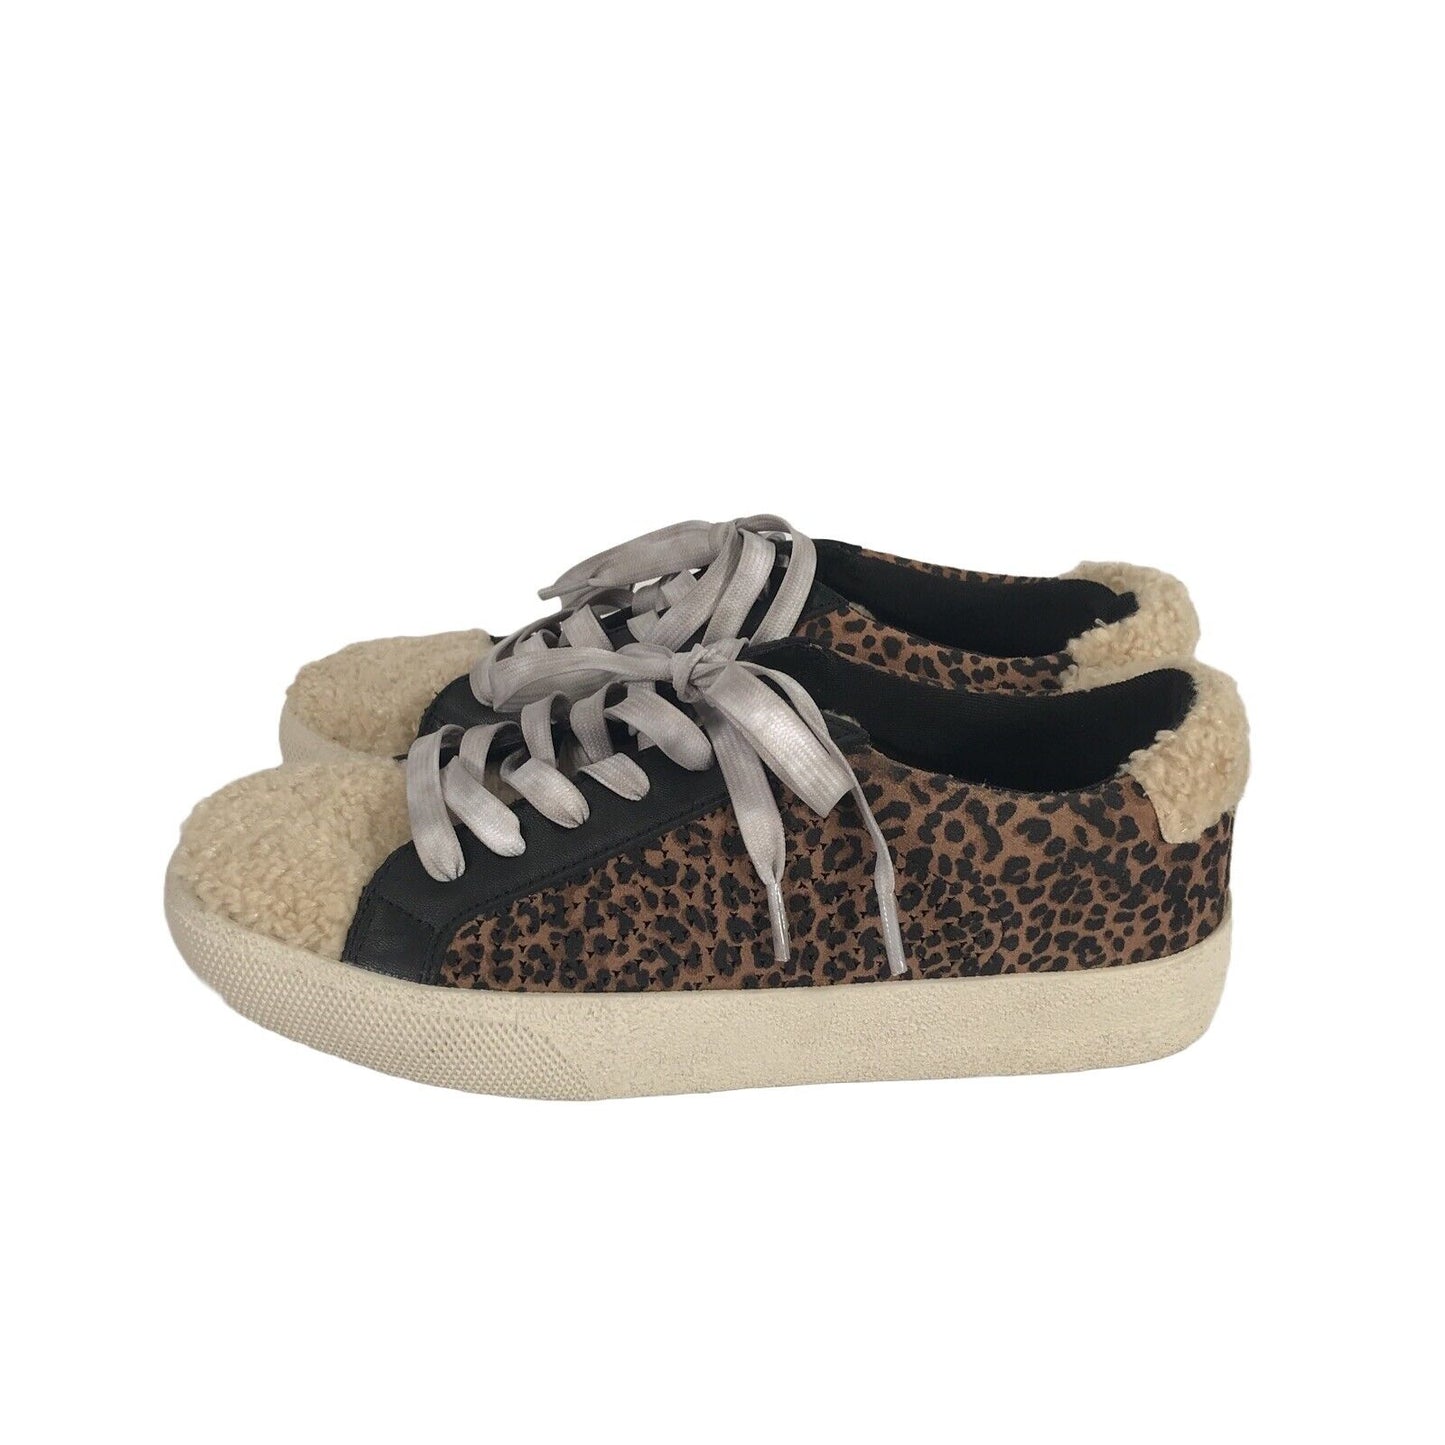 Vince Camuto Women's Brown Animal Print Lace Up Sneakers Shoes Sz 6 M